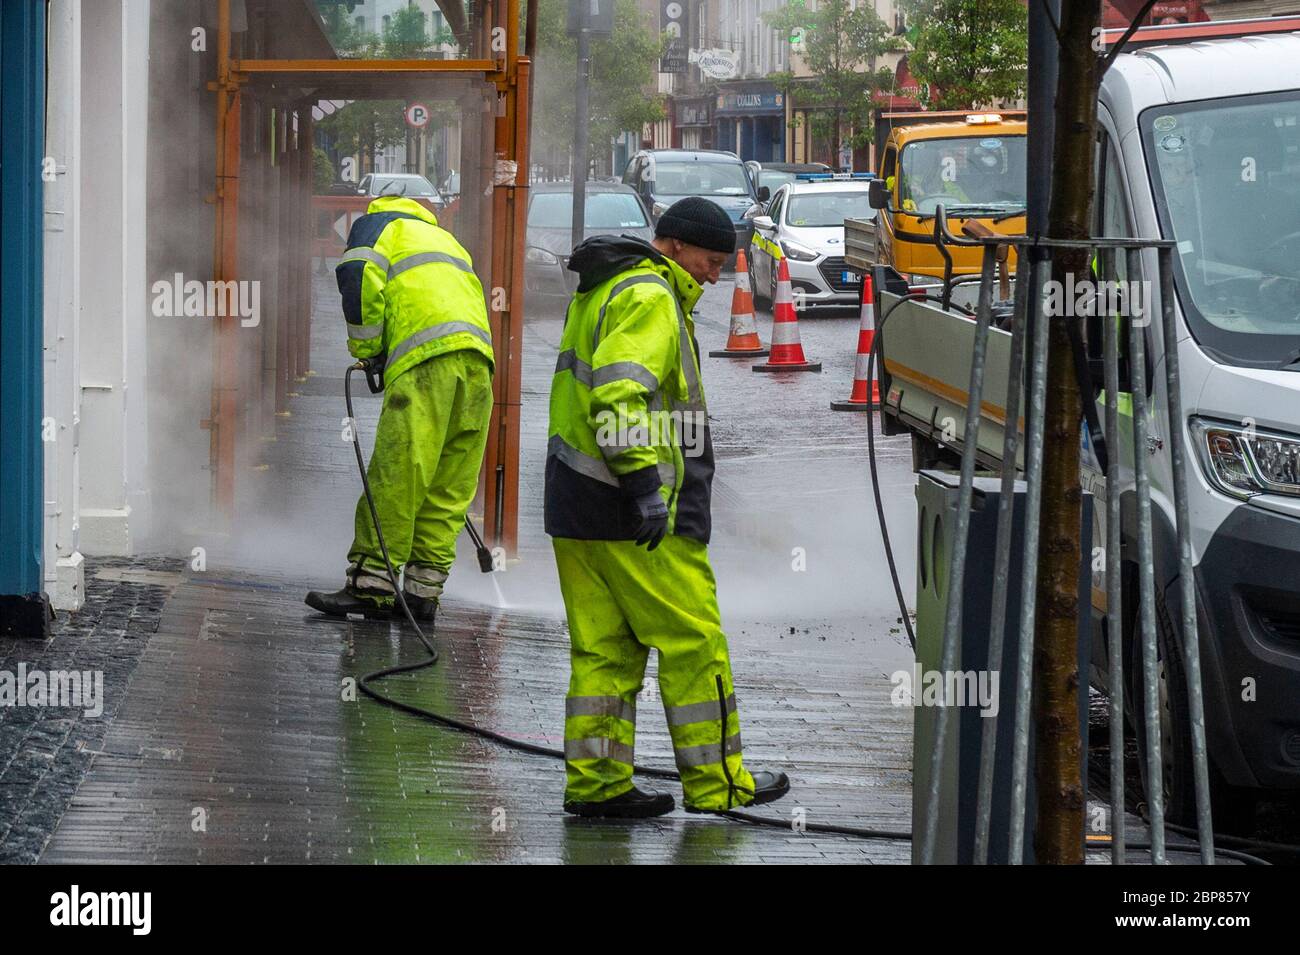 Clonakilty, West Cork, Ireland. 18th May, 2020. Clonakilty had its main street deep cleaned this morning, as part of the 'return to business' phase of exiting the Covid-19 lockdown. The cleaning was completed by Cork County Council. Credit: AG News/Alamy Live News Stock Photo